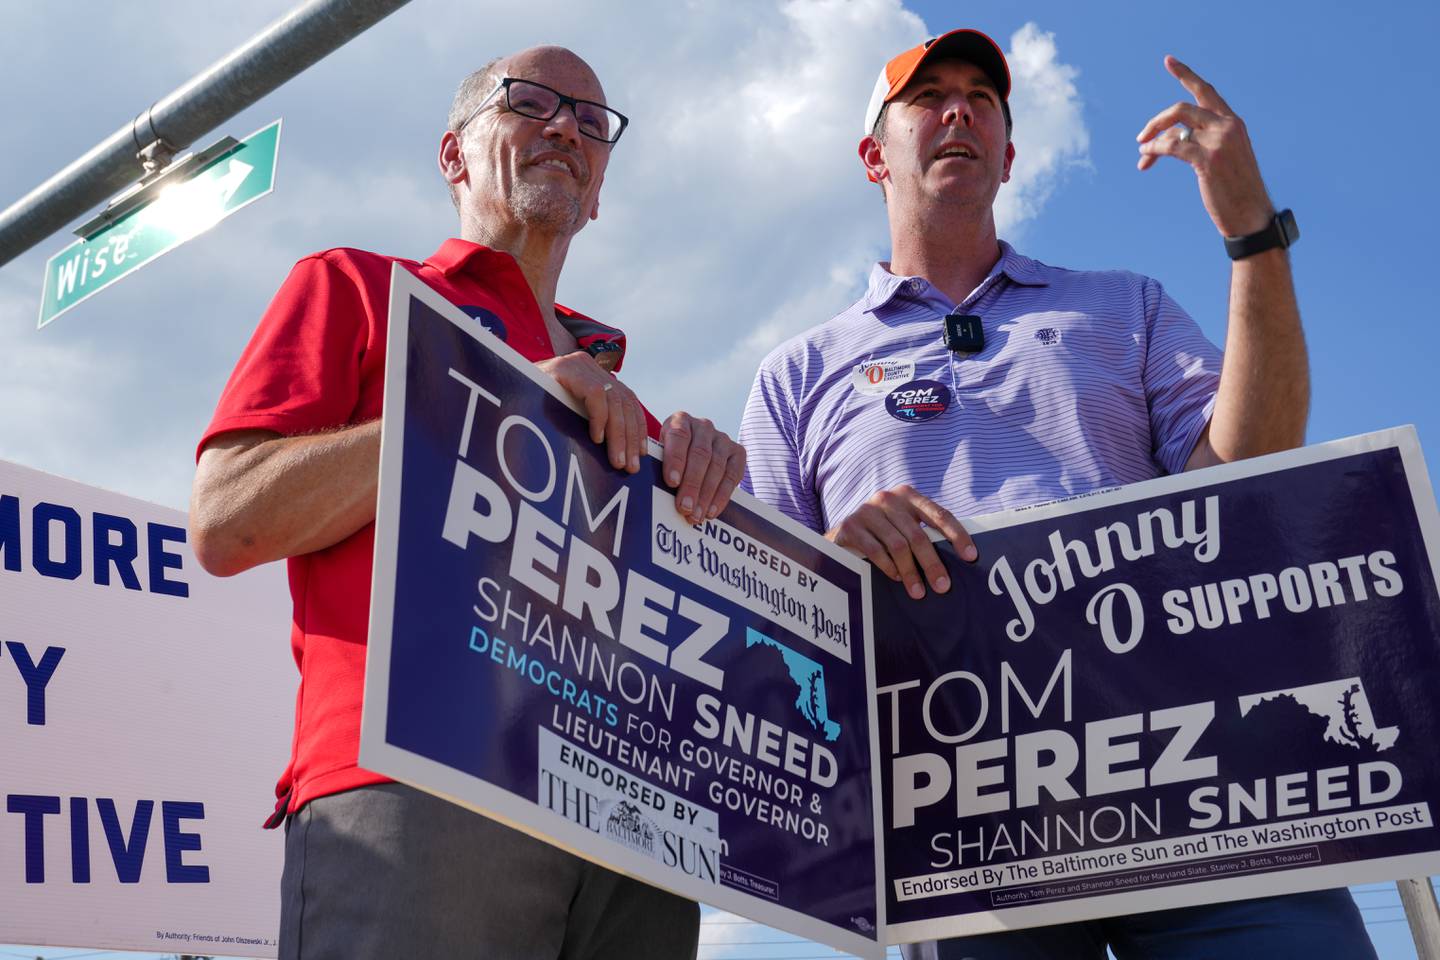 7/15/22—Democratic gubernatorial candidate Tom Perez, left, and Baltimore County Executive Johnny Olszewski, Jr. campaign together at the corner of Wise Ave. and Merritt Blvd. in Dundalk.